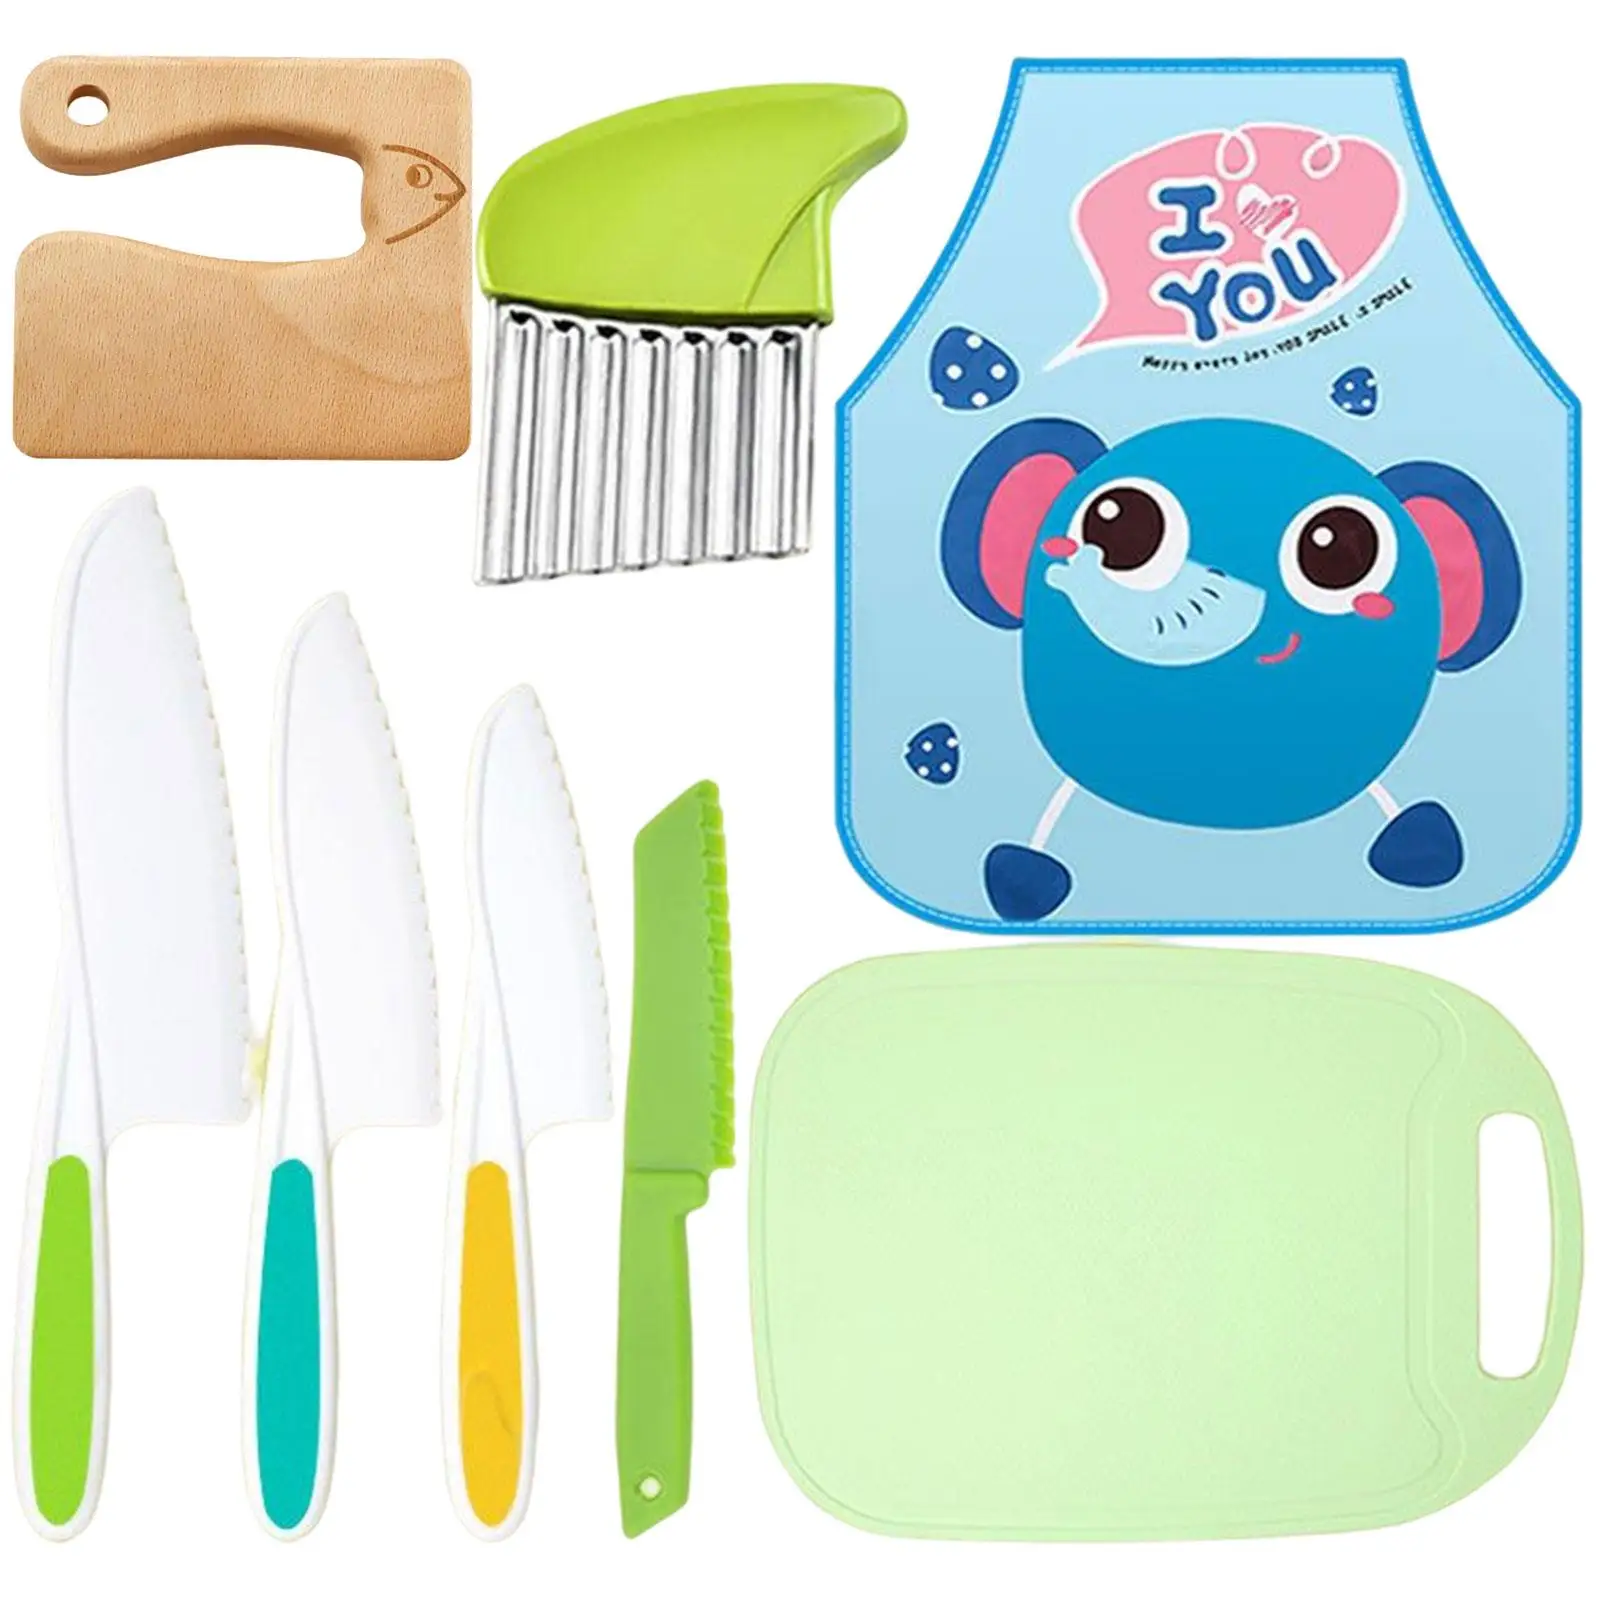 Kitchen Accessories Playset Cutting Board Apron for Children Gifts